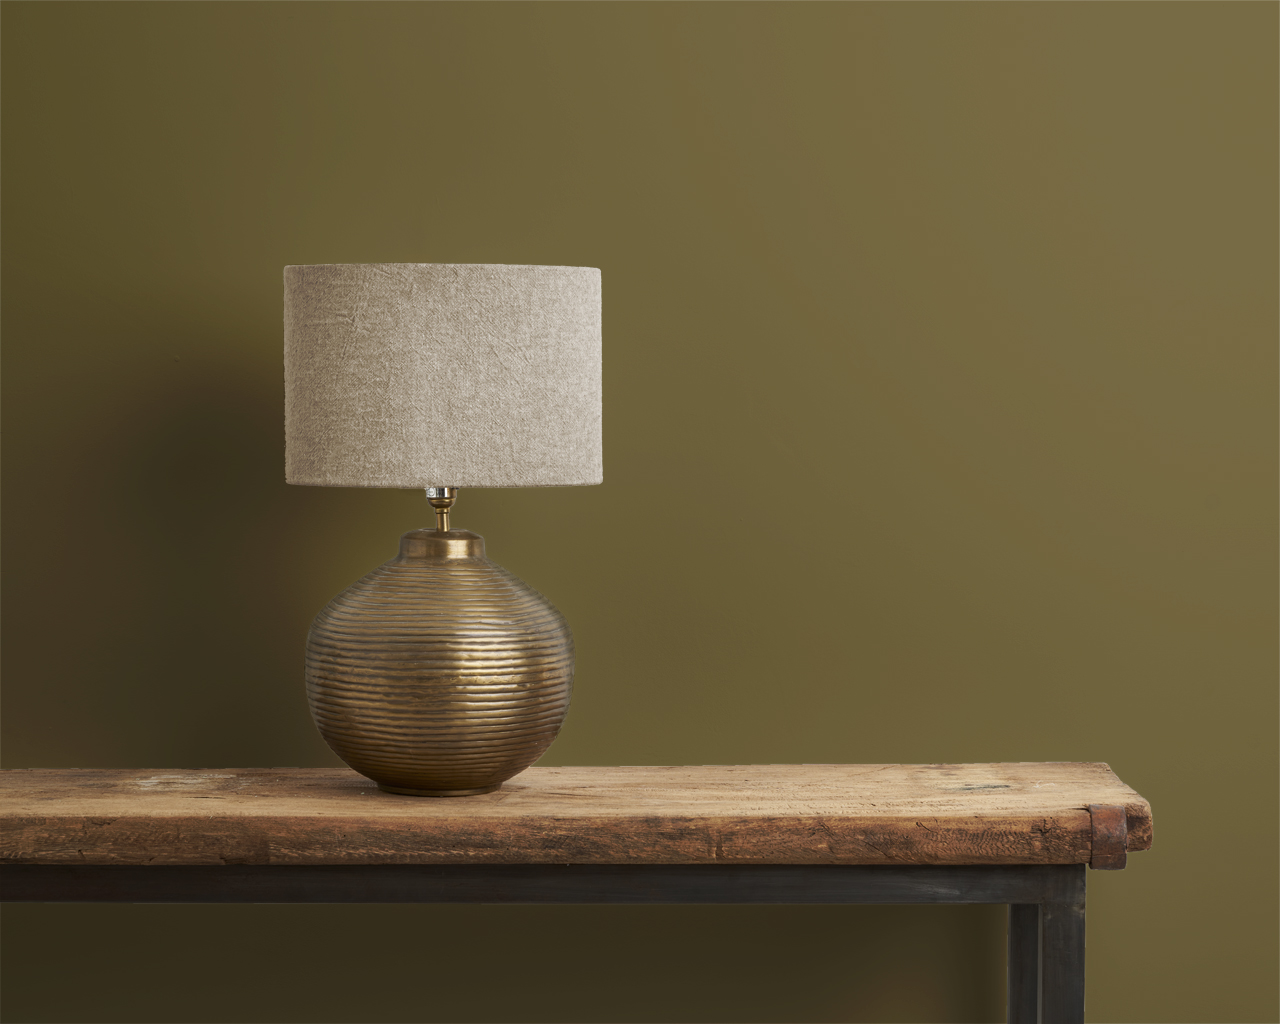 Annie Sloan Wall Paint in Olive with Brass Lamp